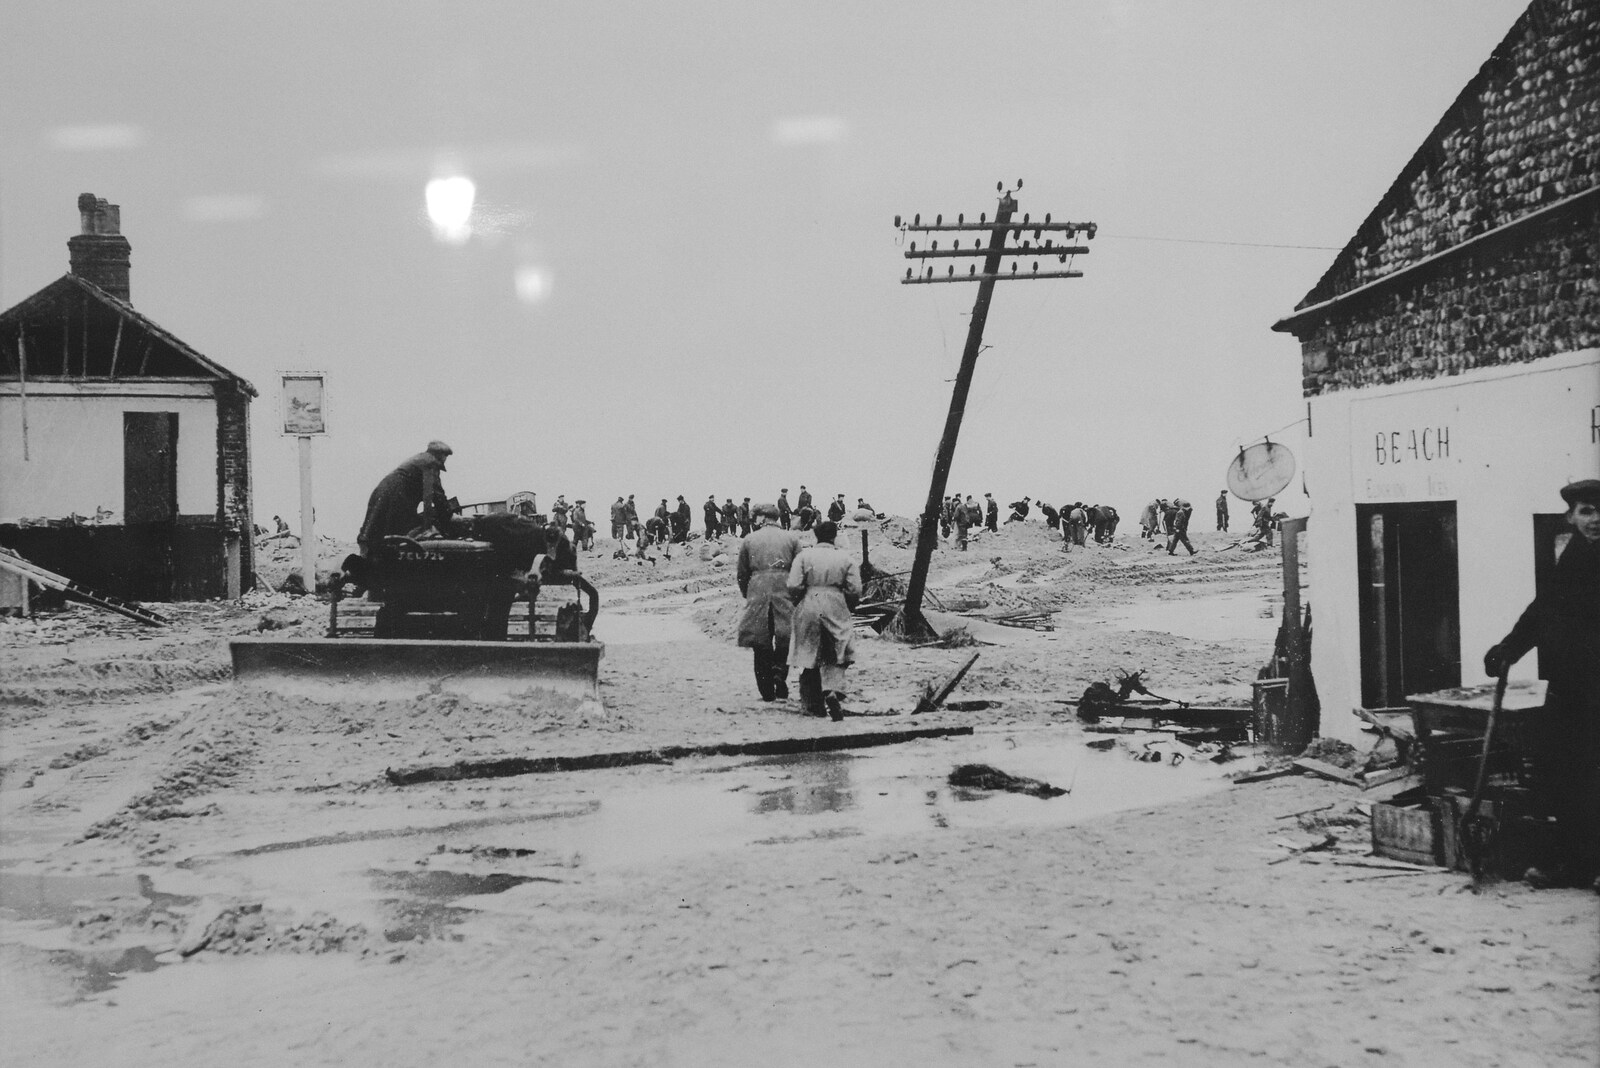 The café has some old photos of the 1953 floods from On the Beach at Sea Palling, Norfolk - 8th May 2022